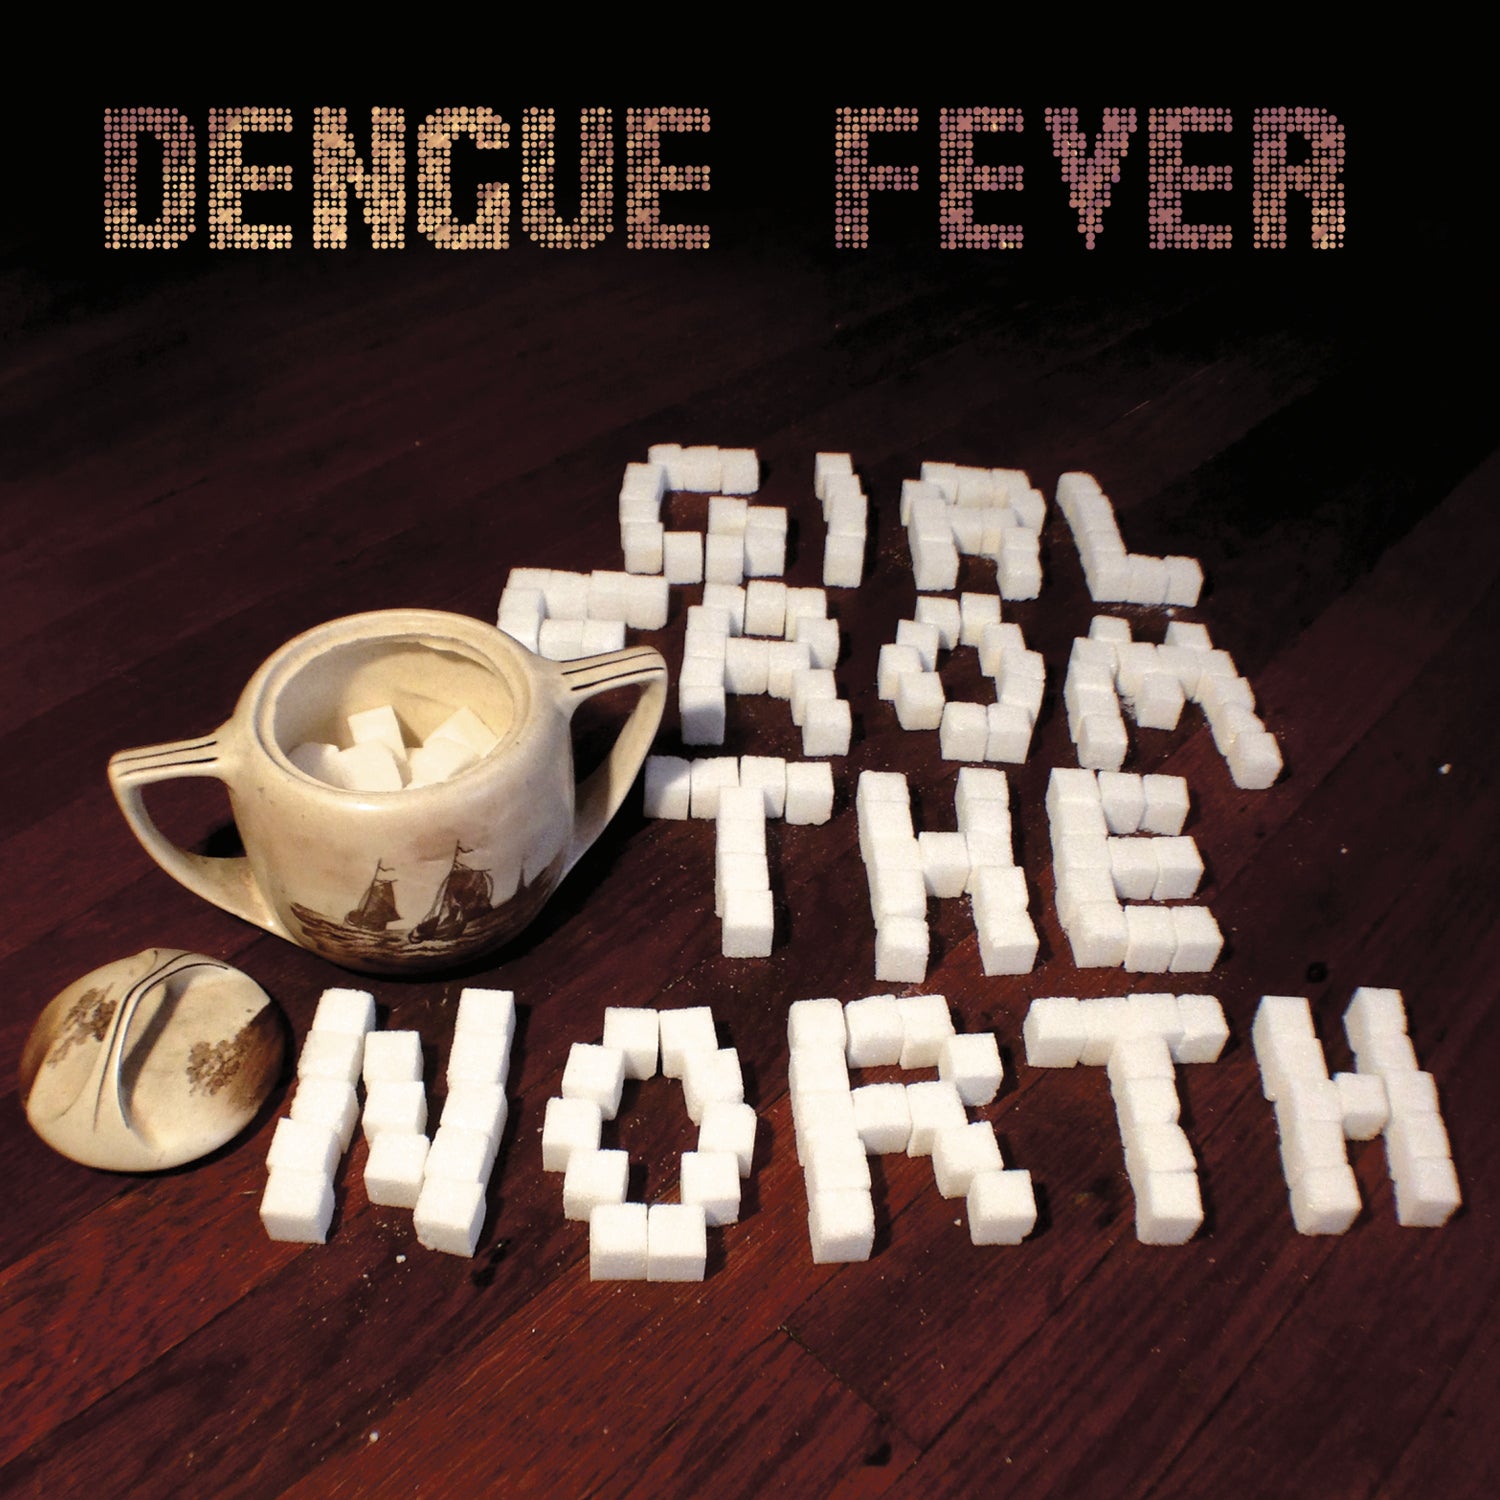 Girl From the North EP